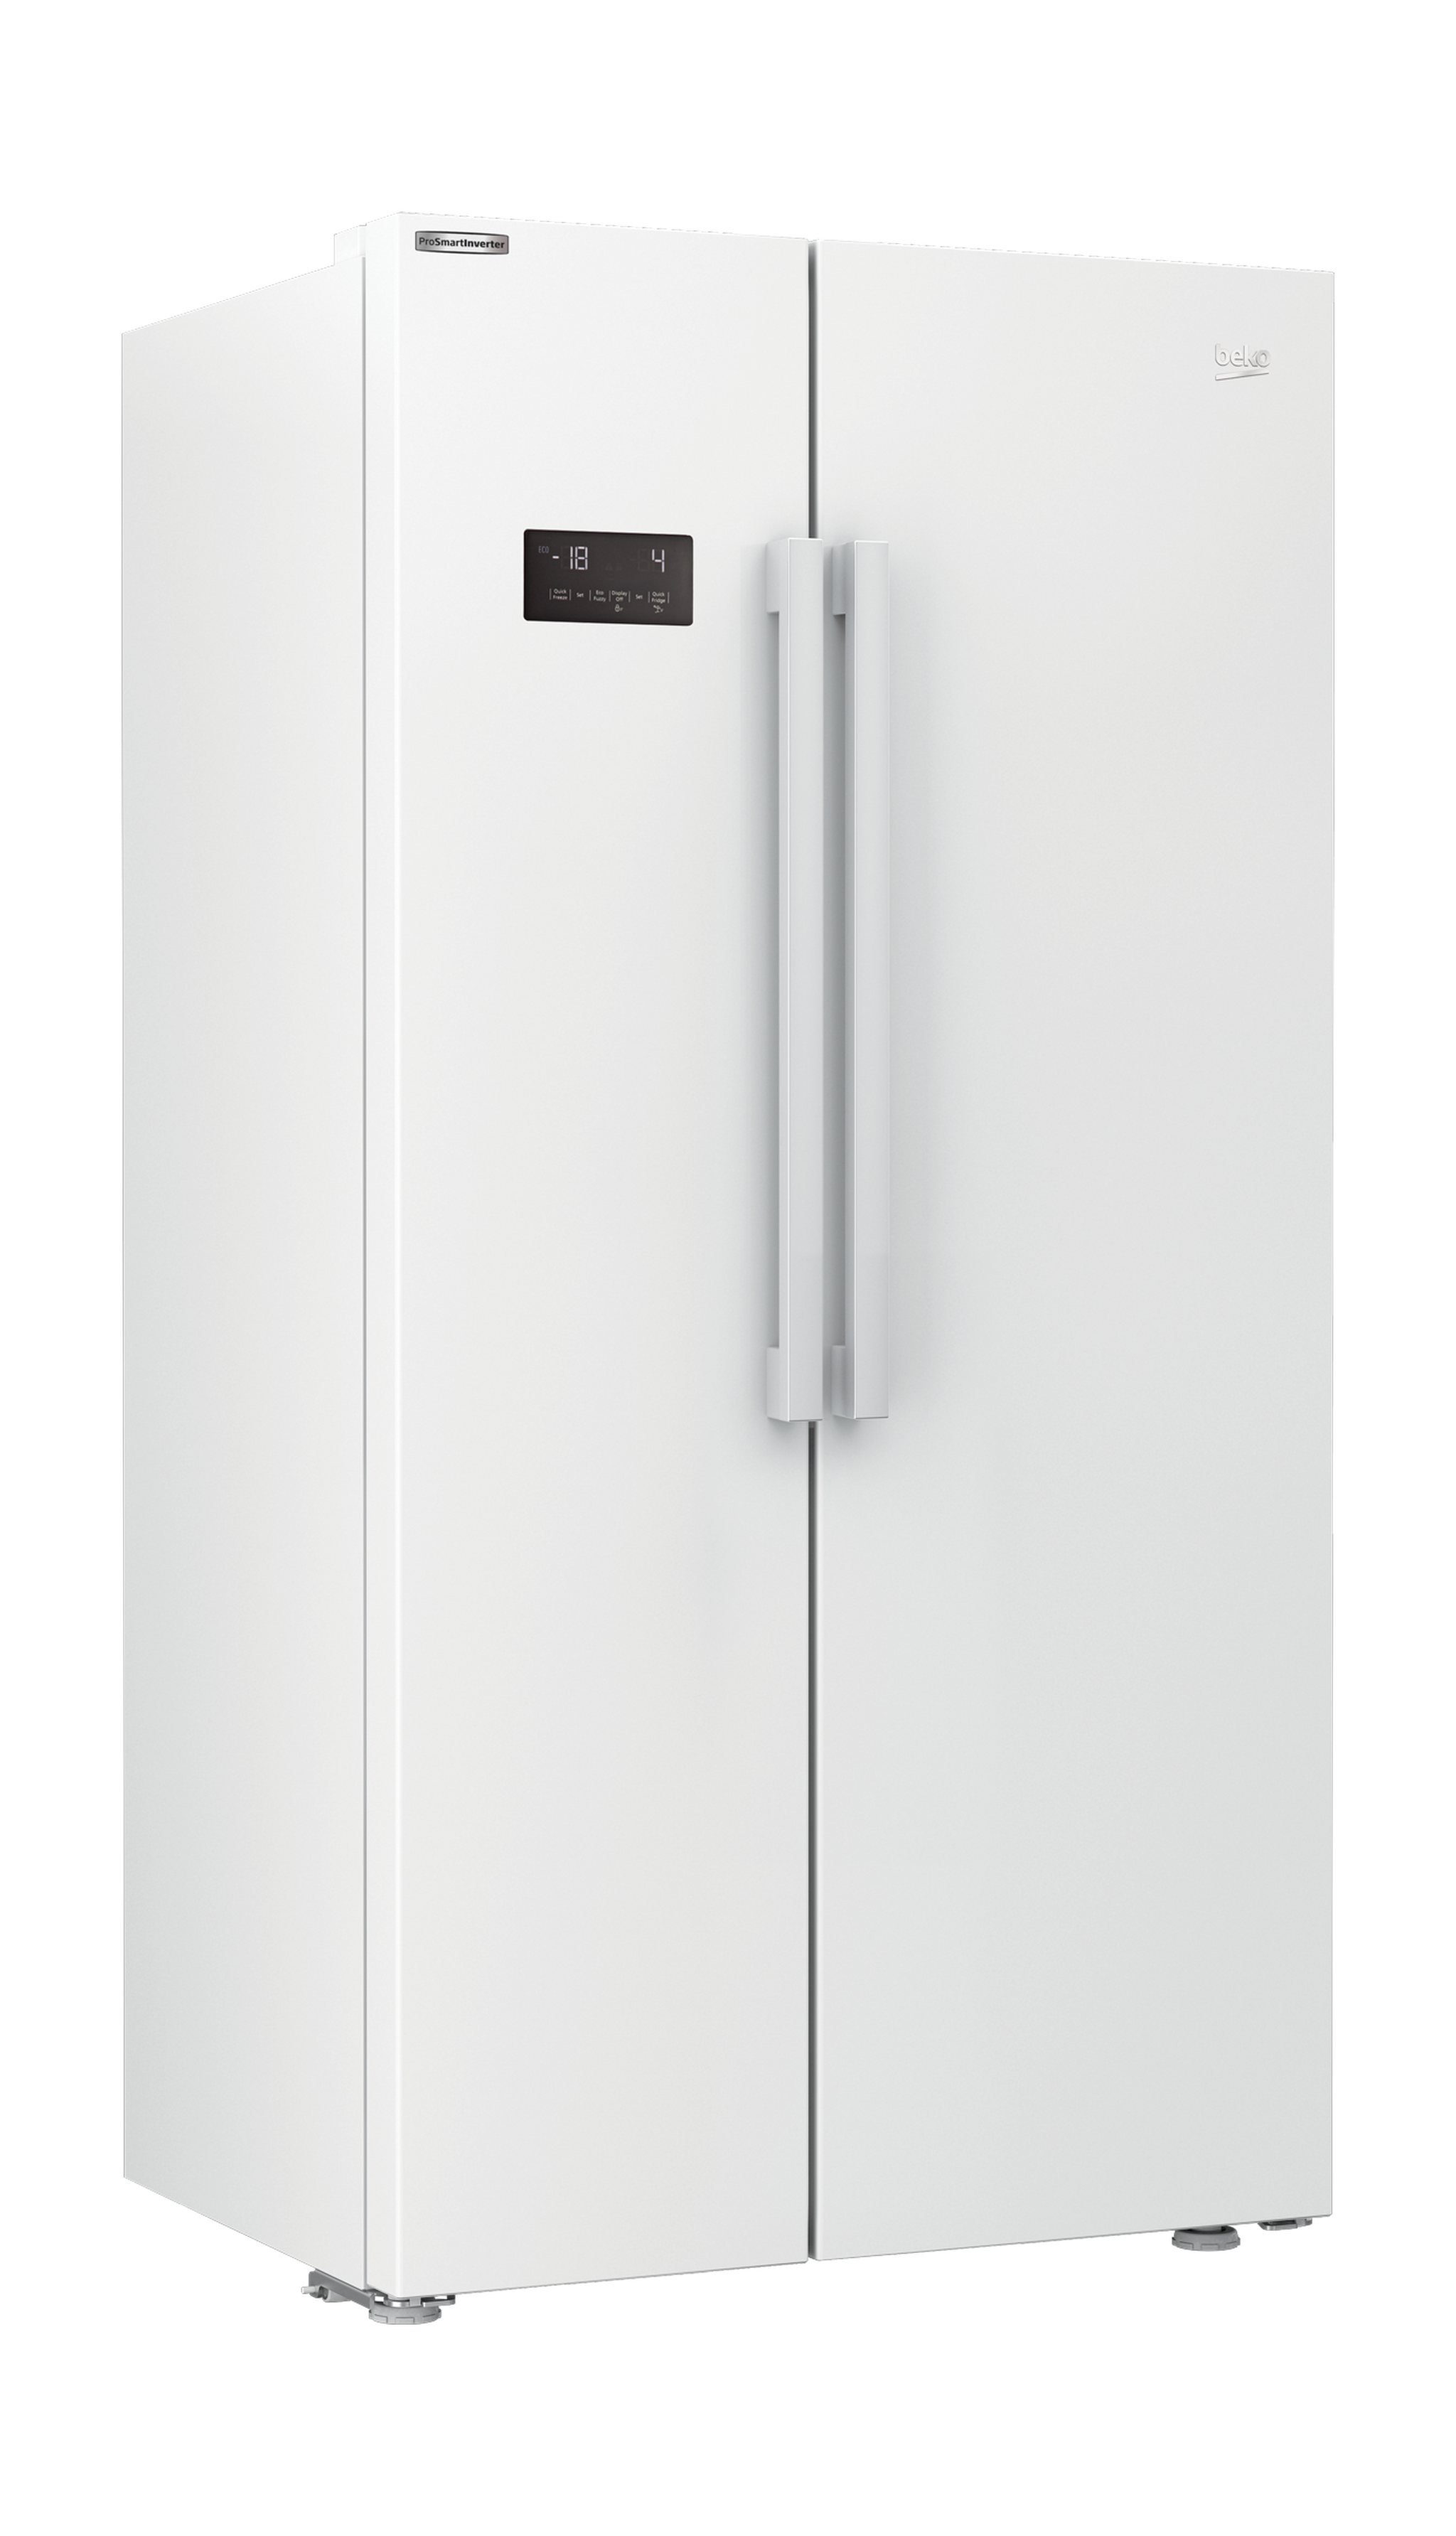 Beko 24.5Cft.640L Side By Side Refrigerator (GN170110W) – White